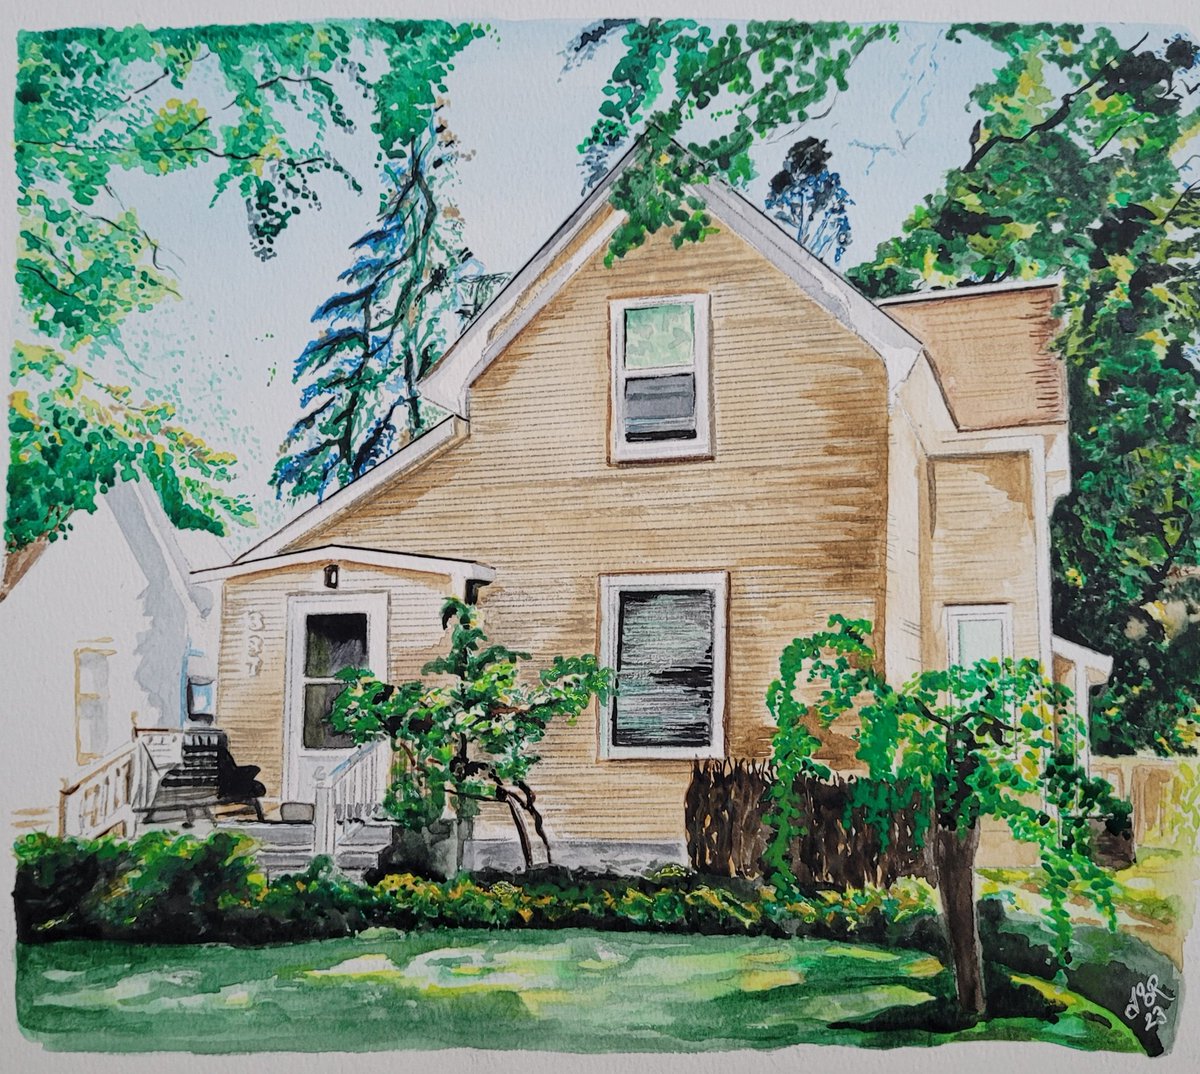 Latest watercolour A3. A very cherished family home in the USA #watercolour #watercolor #ArtistOnTwitter #ArtistAppreciation #watercolorpainting #art  #artoftheday #artist  #commissionedart
#painting  #wallart #interiordesign #home #homeportrait #house #houseportrait #uniquegift